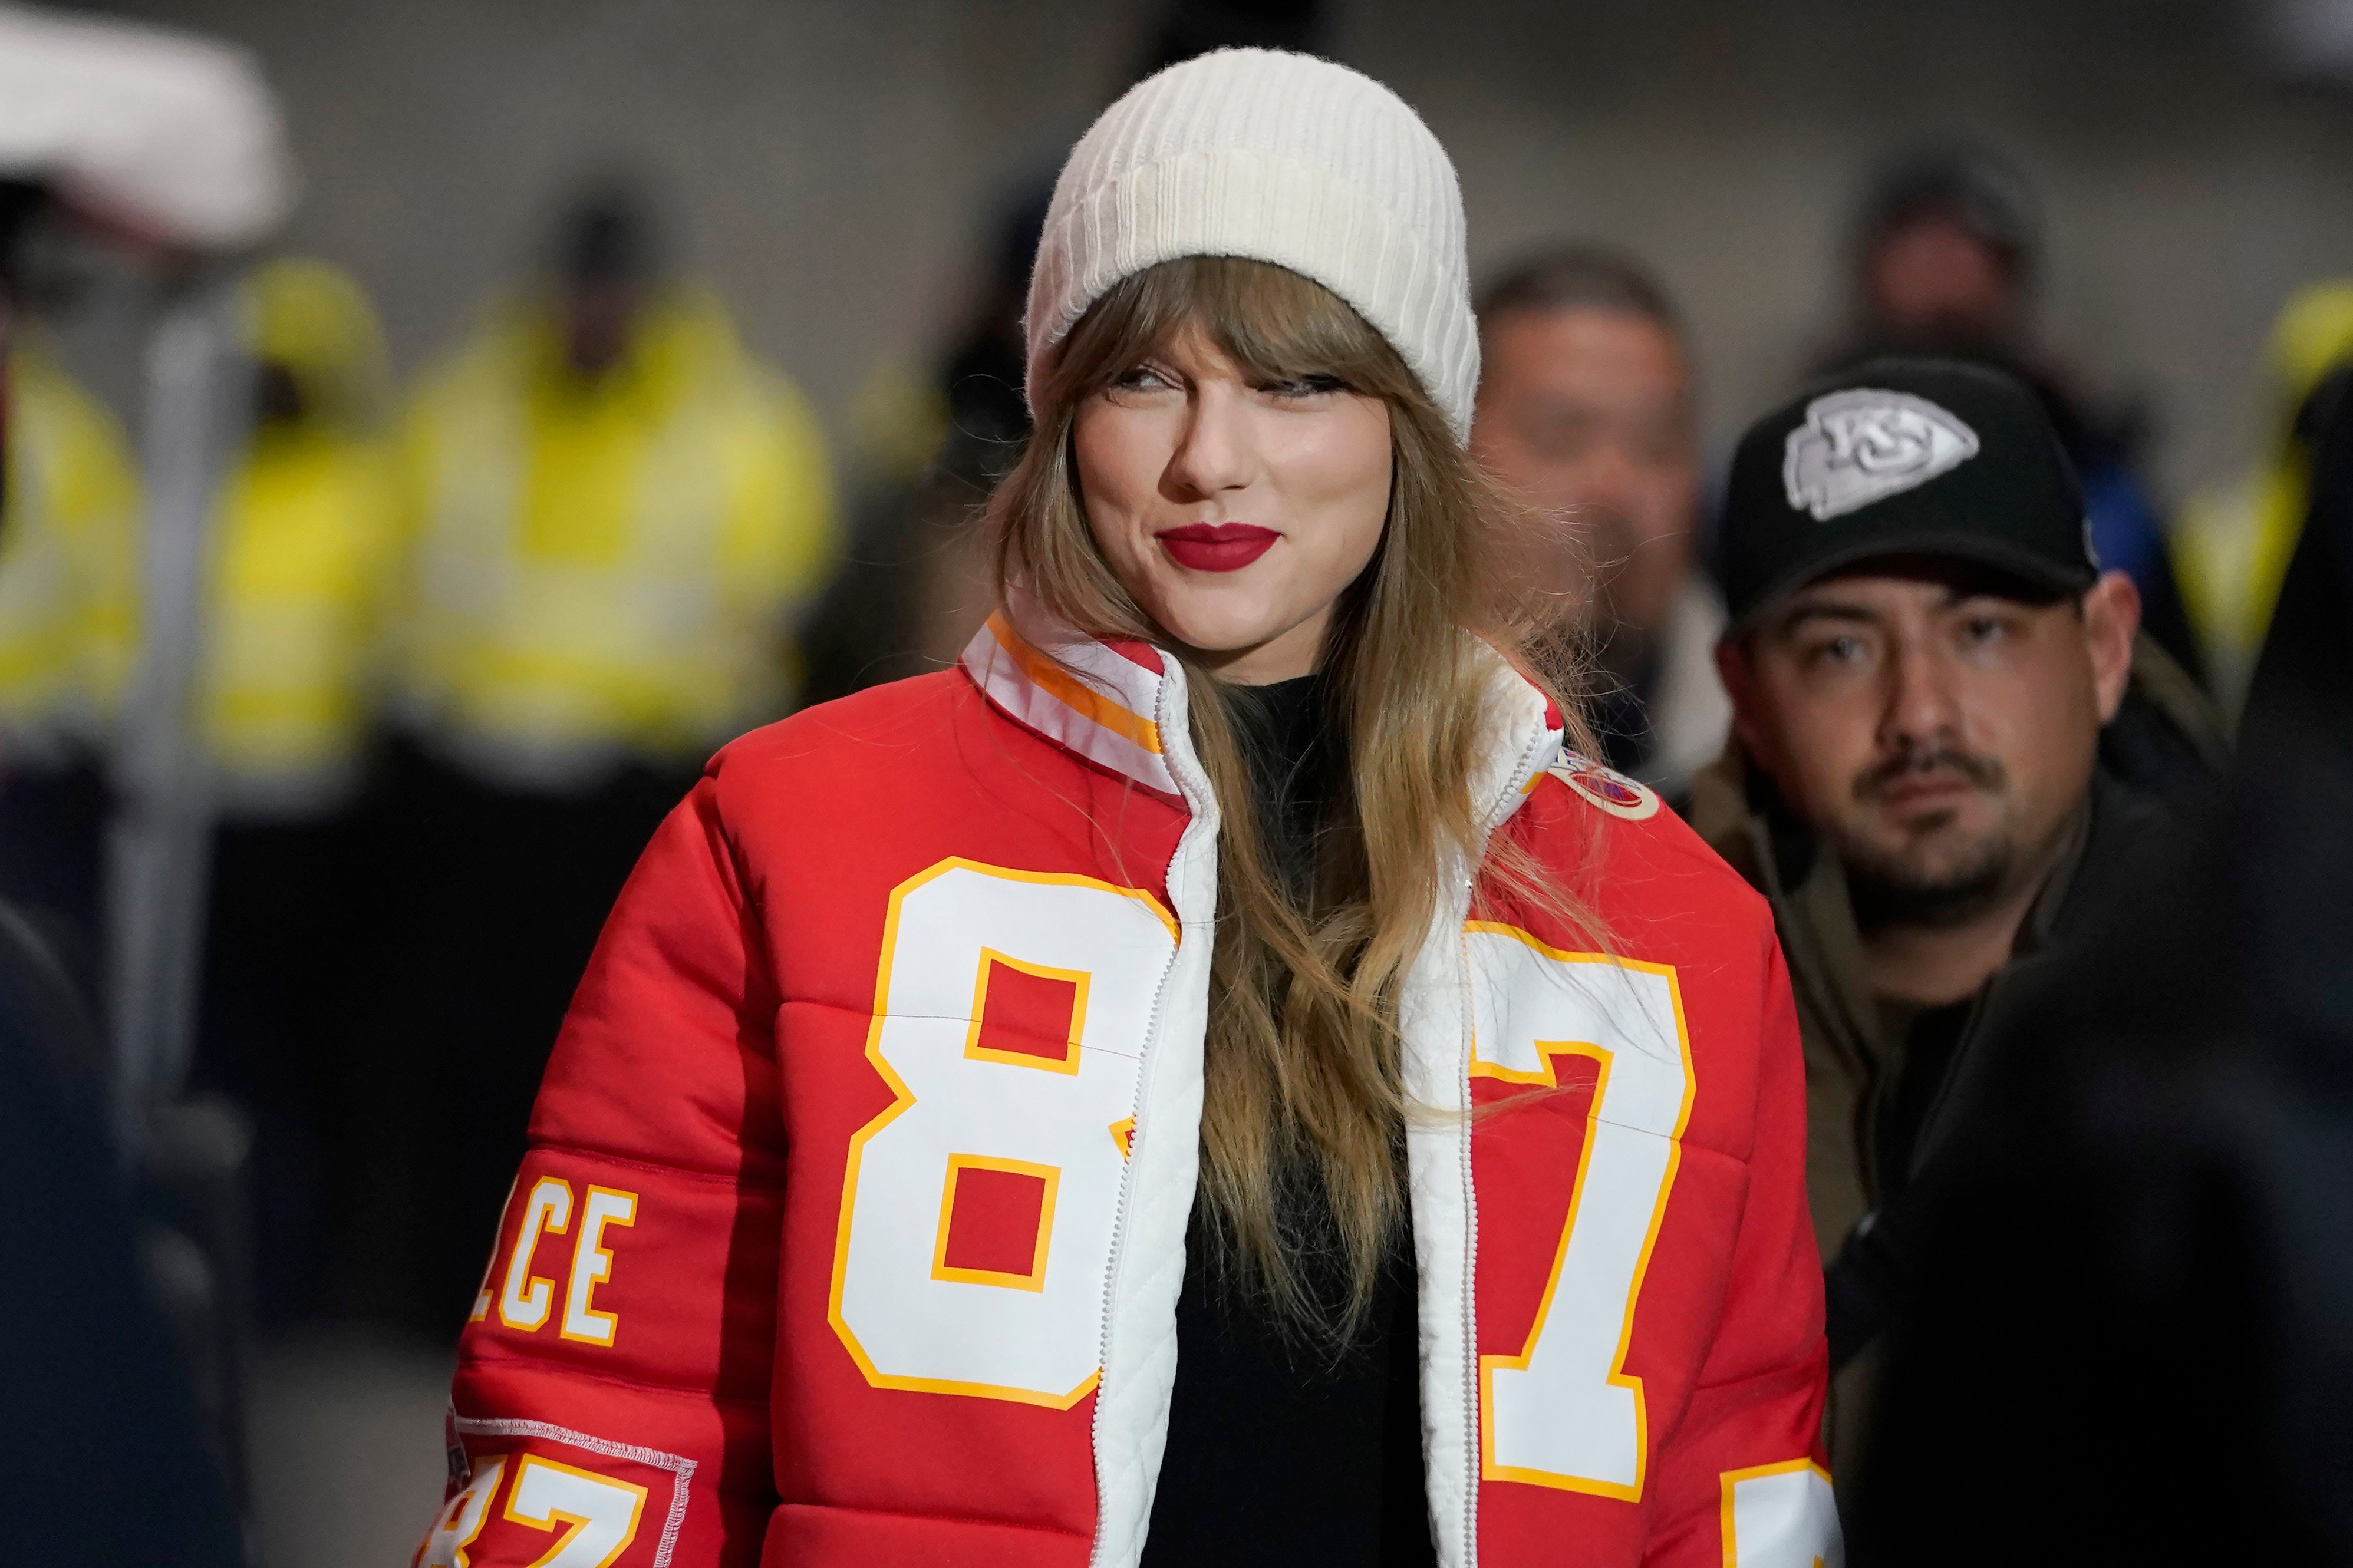 Taylor Swift “cannot style a dress. Or a skirt. Or anything”, claims one critic at Fashion Magazine; others appreciate the down-to-earth authenticity of her off-duty looks, like what she wore for this outing at a recent Kansas City Chiefs match on January 13. Photo: AP Photo